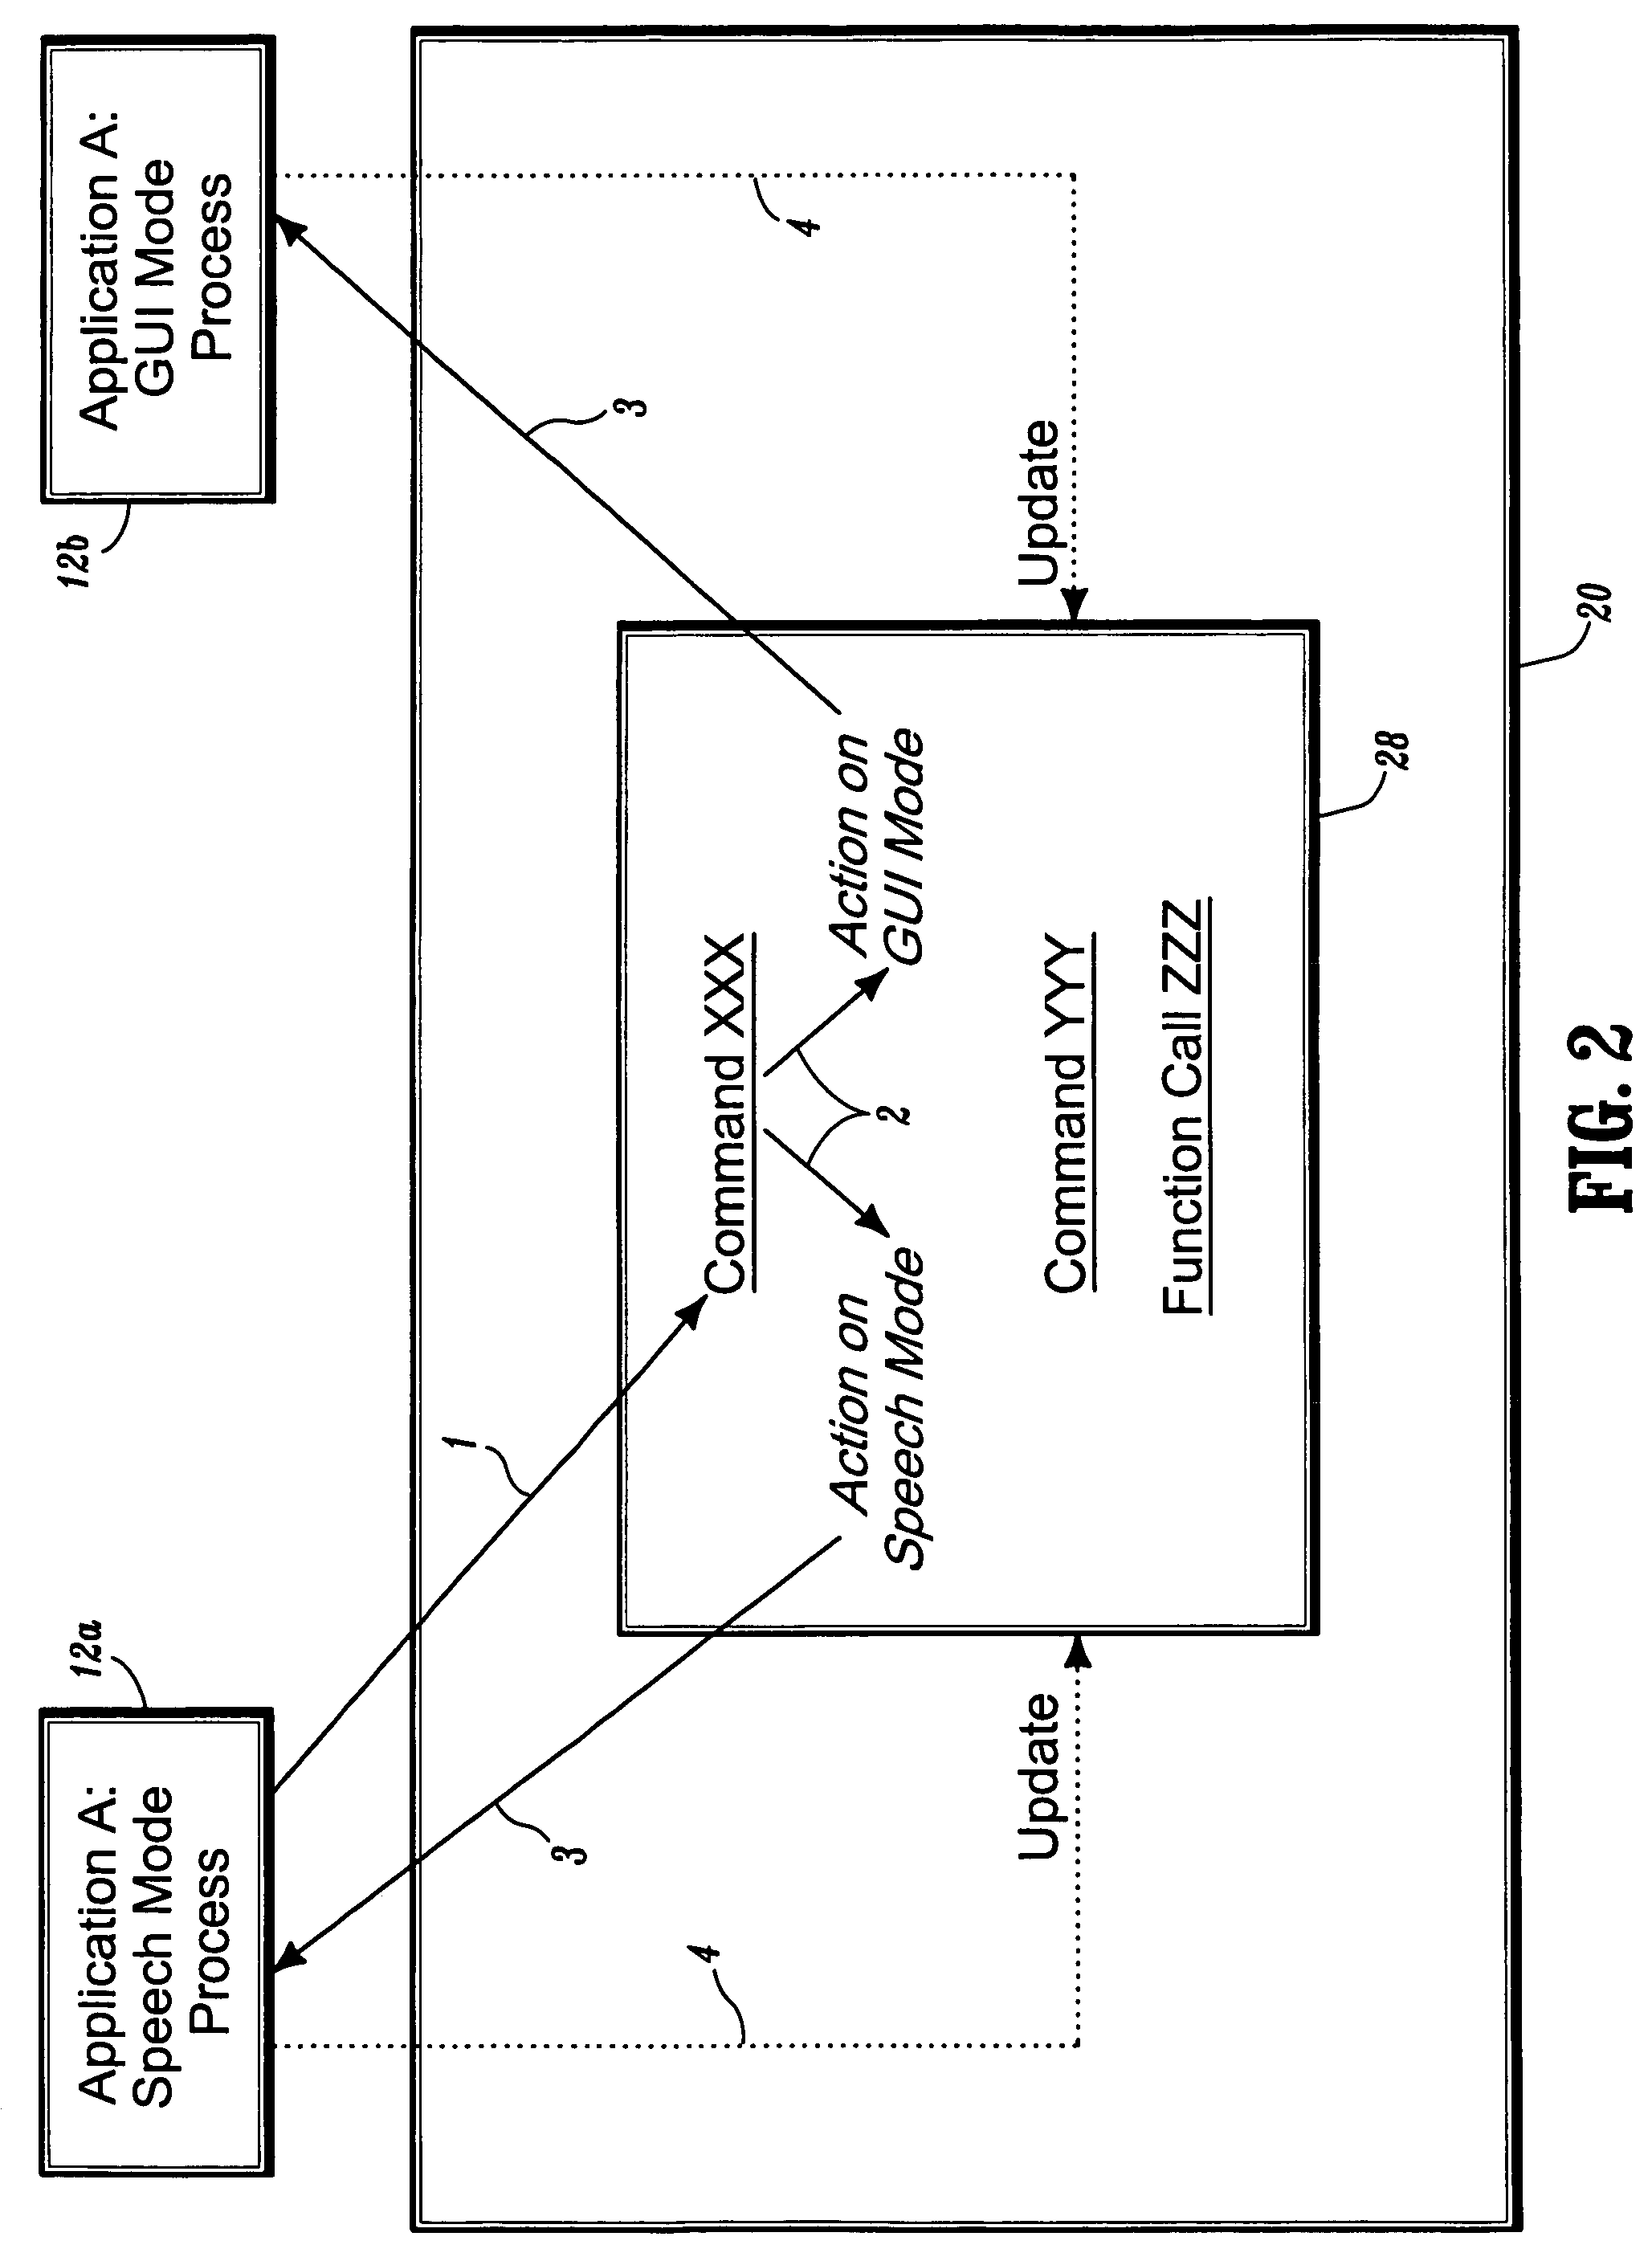 Systems and methods for synchronizing multi-modal interactions